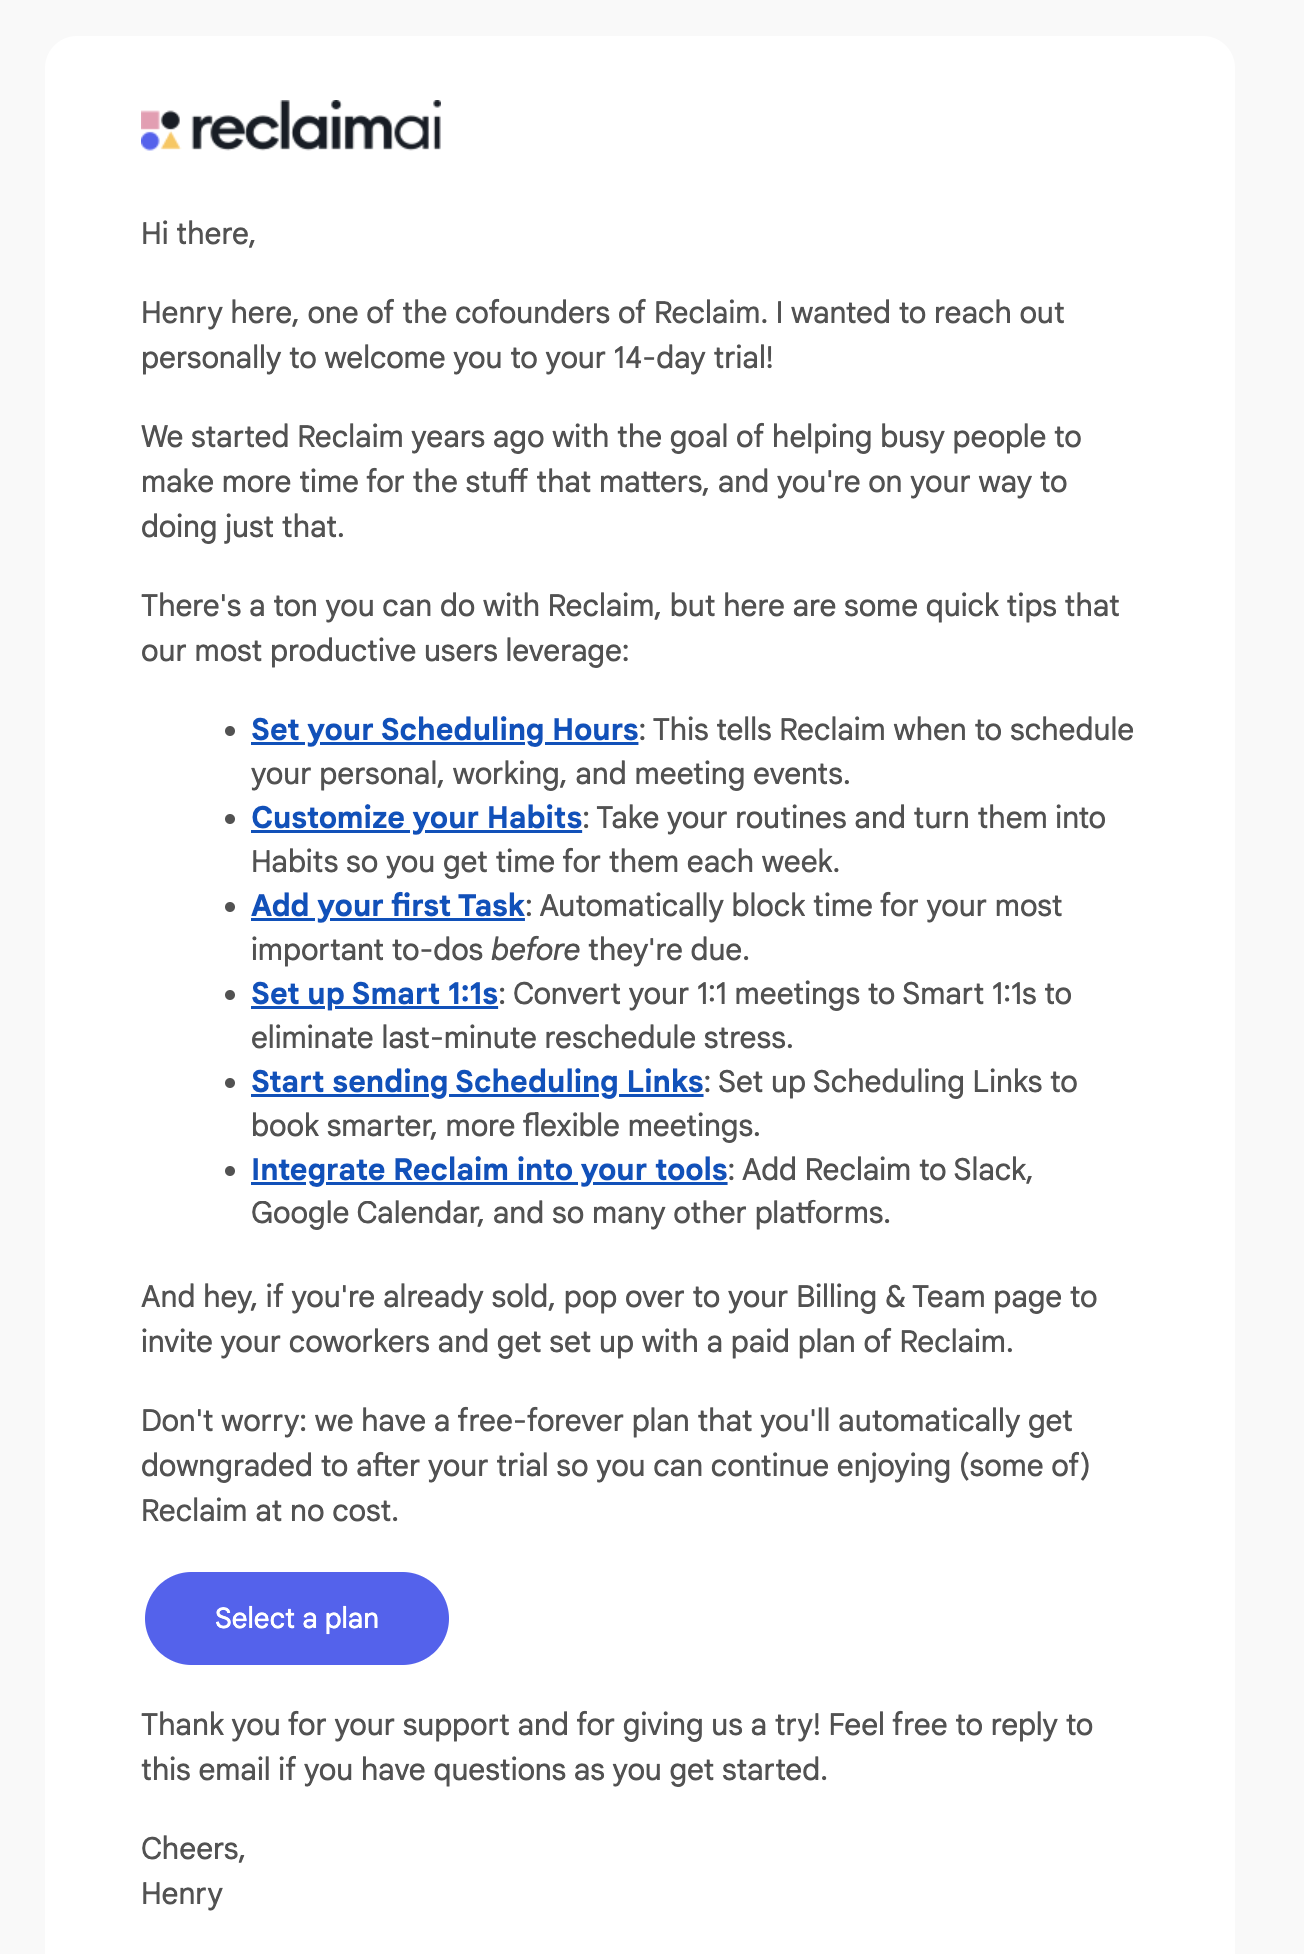 Screenshot of an email from Reclaim.ai